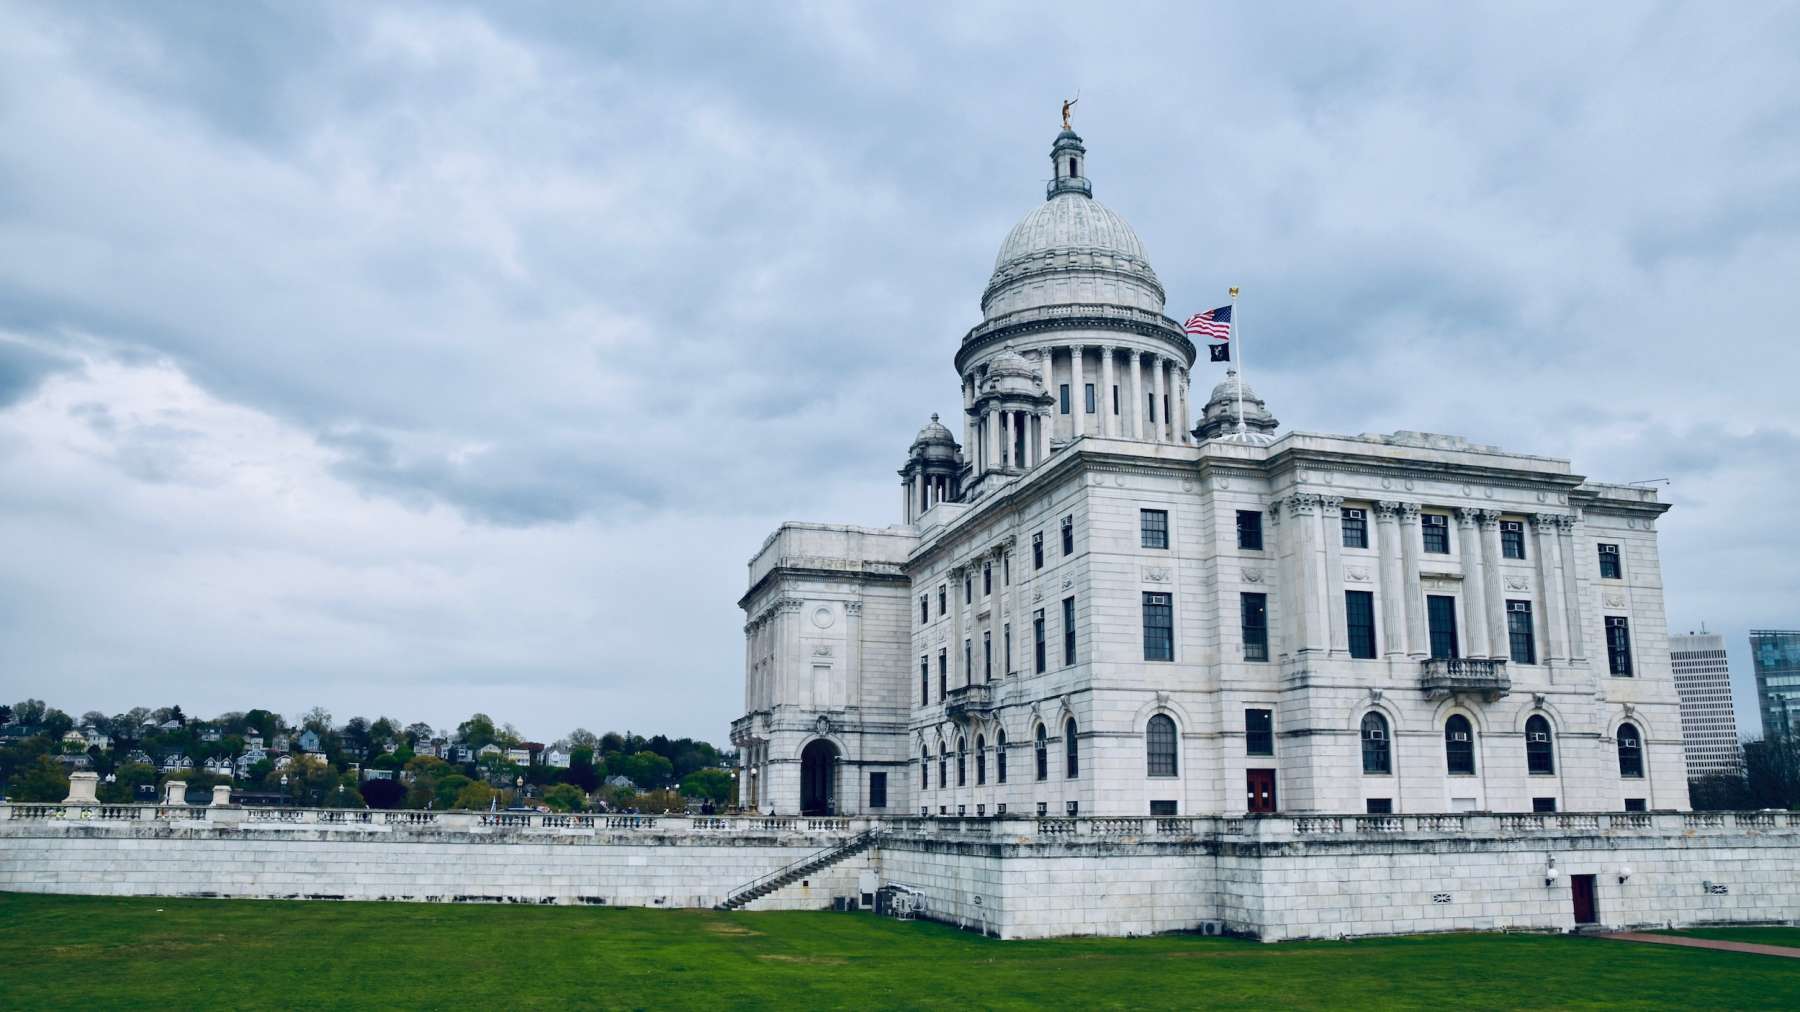 Rhode Island News: Community groups push for ‘Justice Budget;’ call for affordable housing, economic justice, and defunding prisons and police